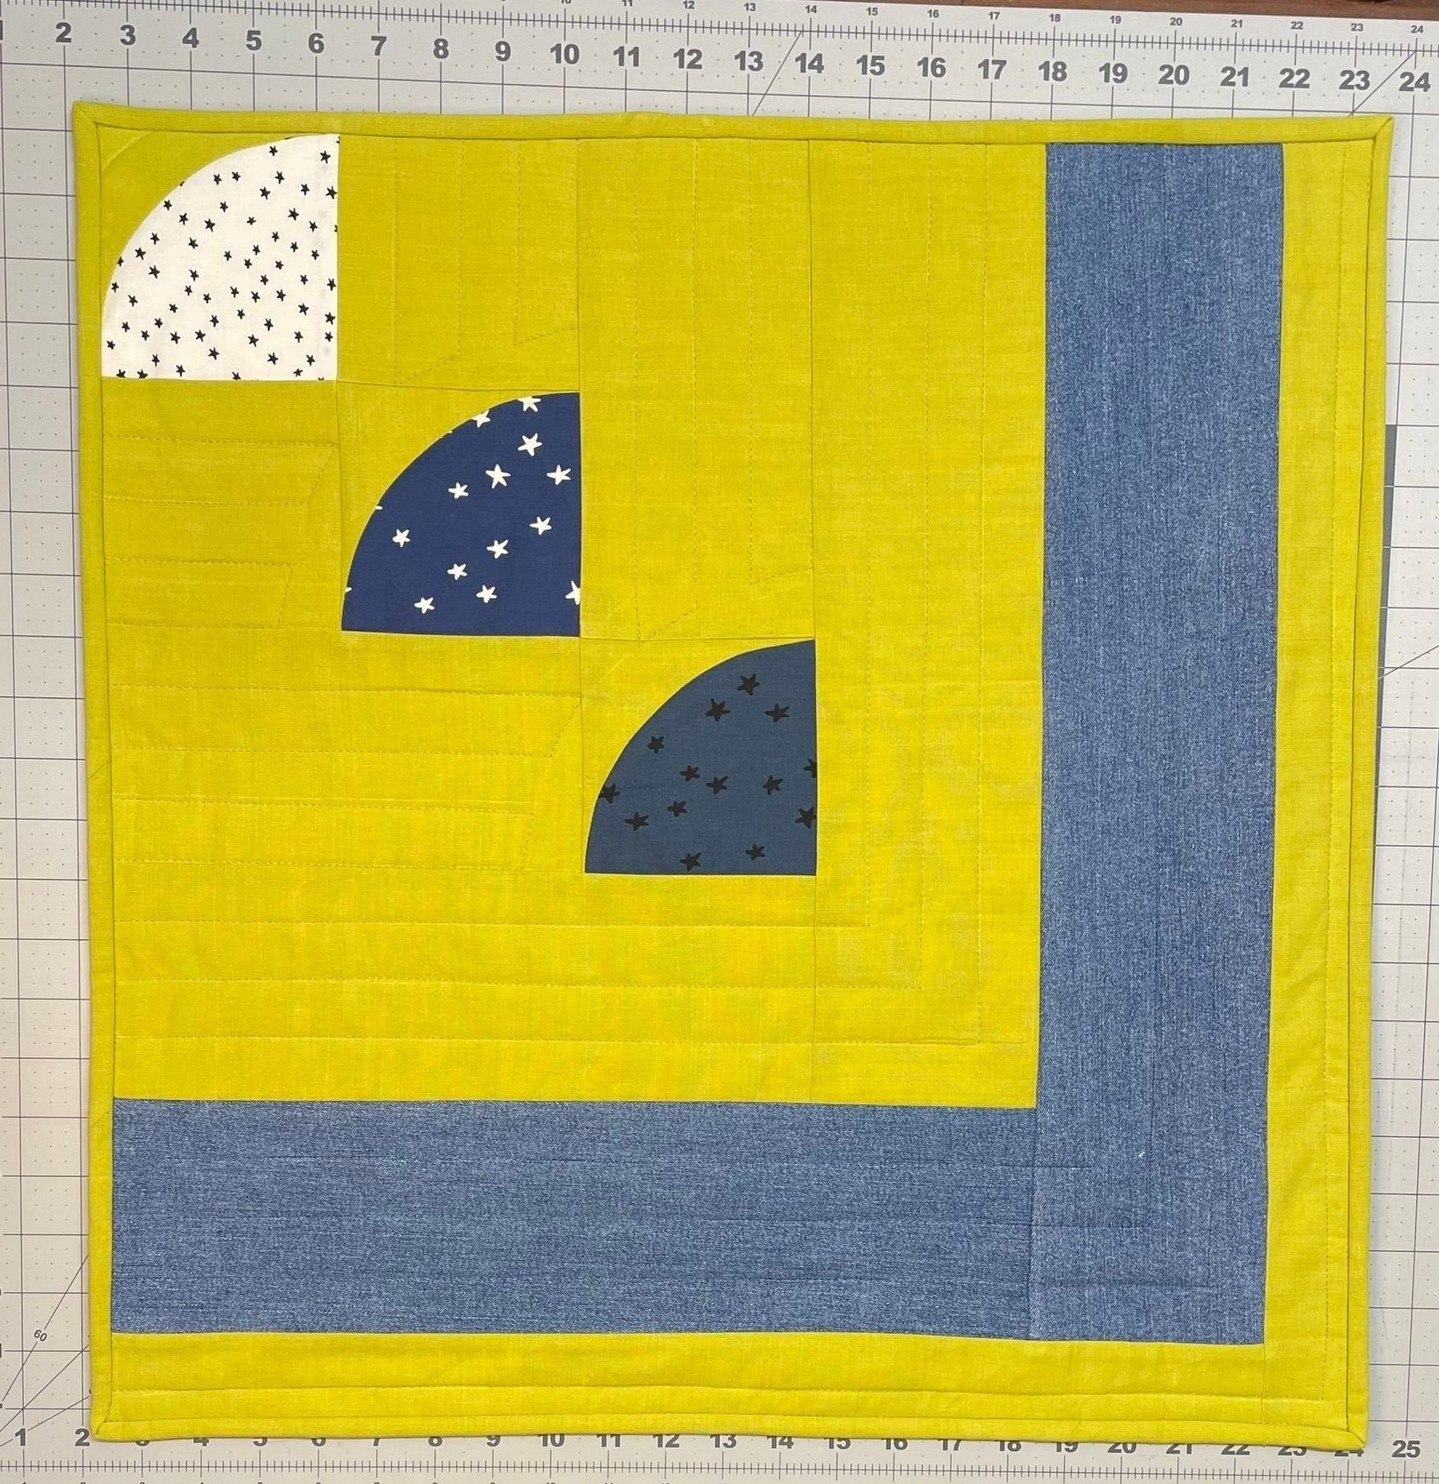 Add a modern twist to your living area or bedroom with this bold quilted wall hanging! ⁣
⁣
Minimalist design, handmade from 100% cotton and upcycled denim.  The star print fabrics bring a touch of whimsy, and the near-chartreuse background will brigh